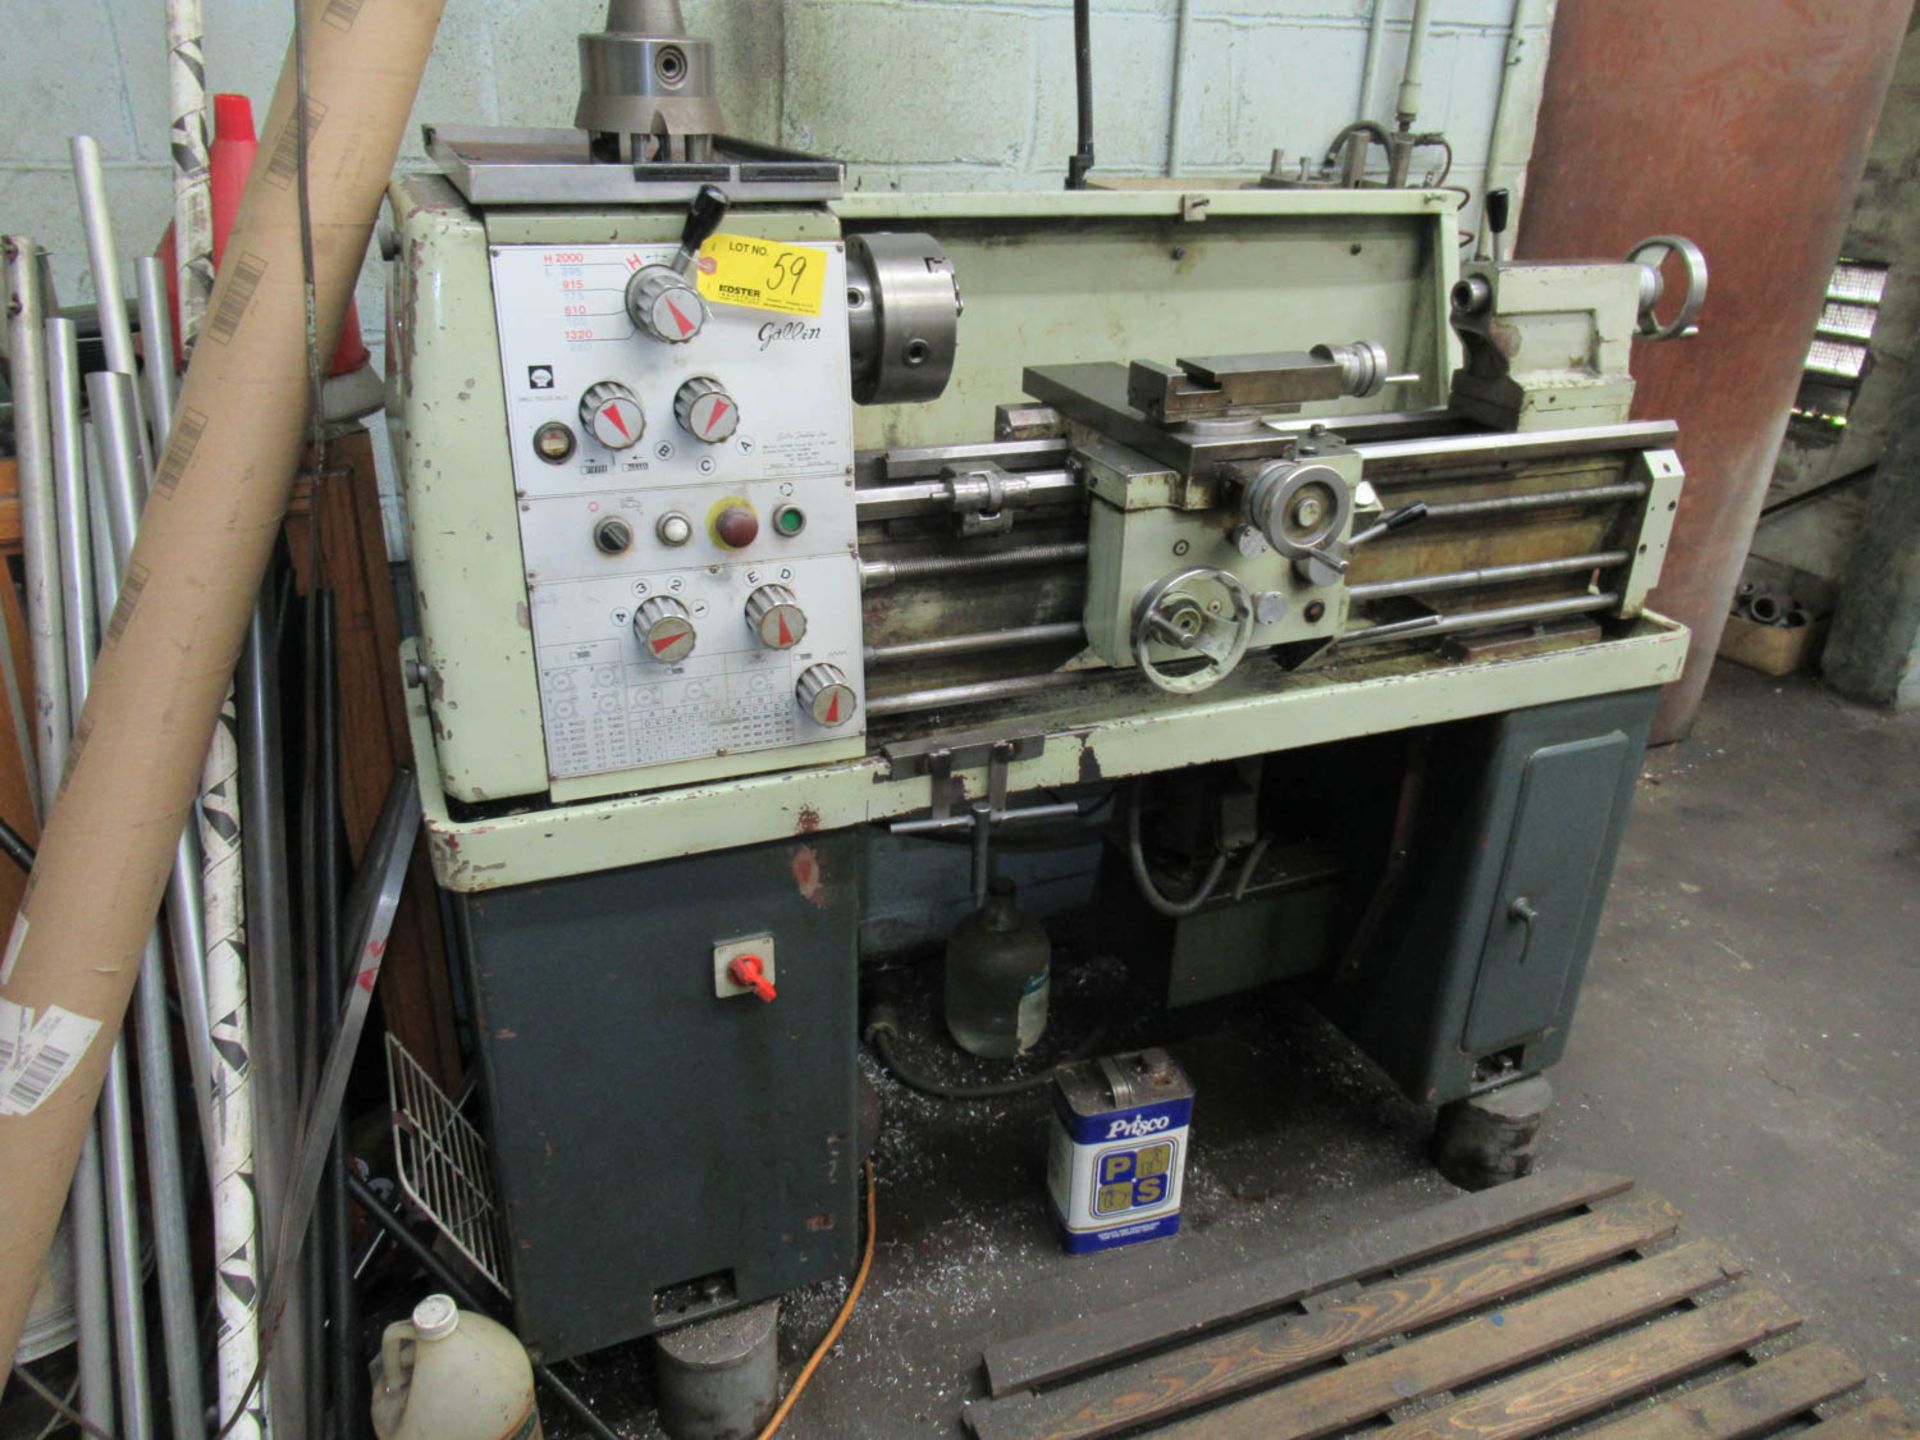 12" X 30" GALLIN MDL. 3601 LATHE, INCH / METRIC THREADING, 8-SPINDLE SPEEDS, 105-2000 RPM, CAMLOC